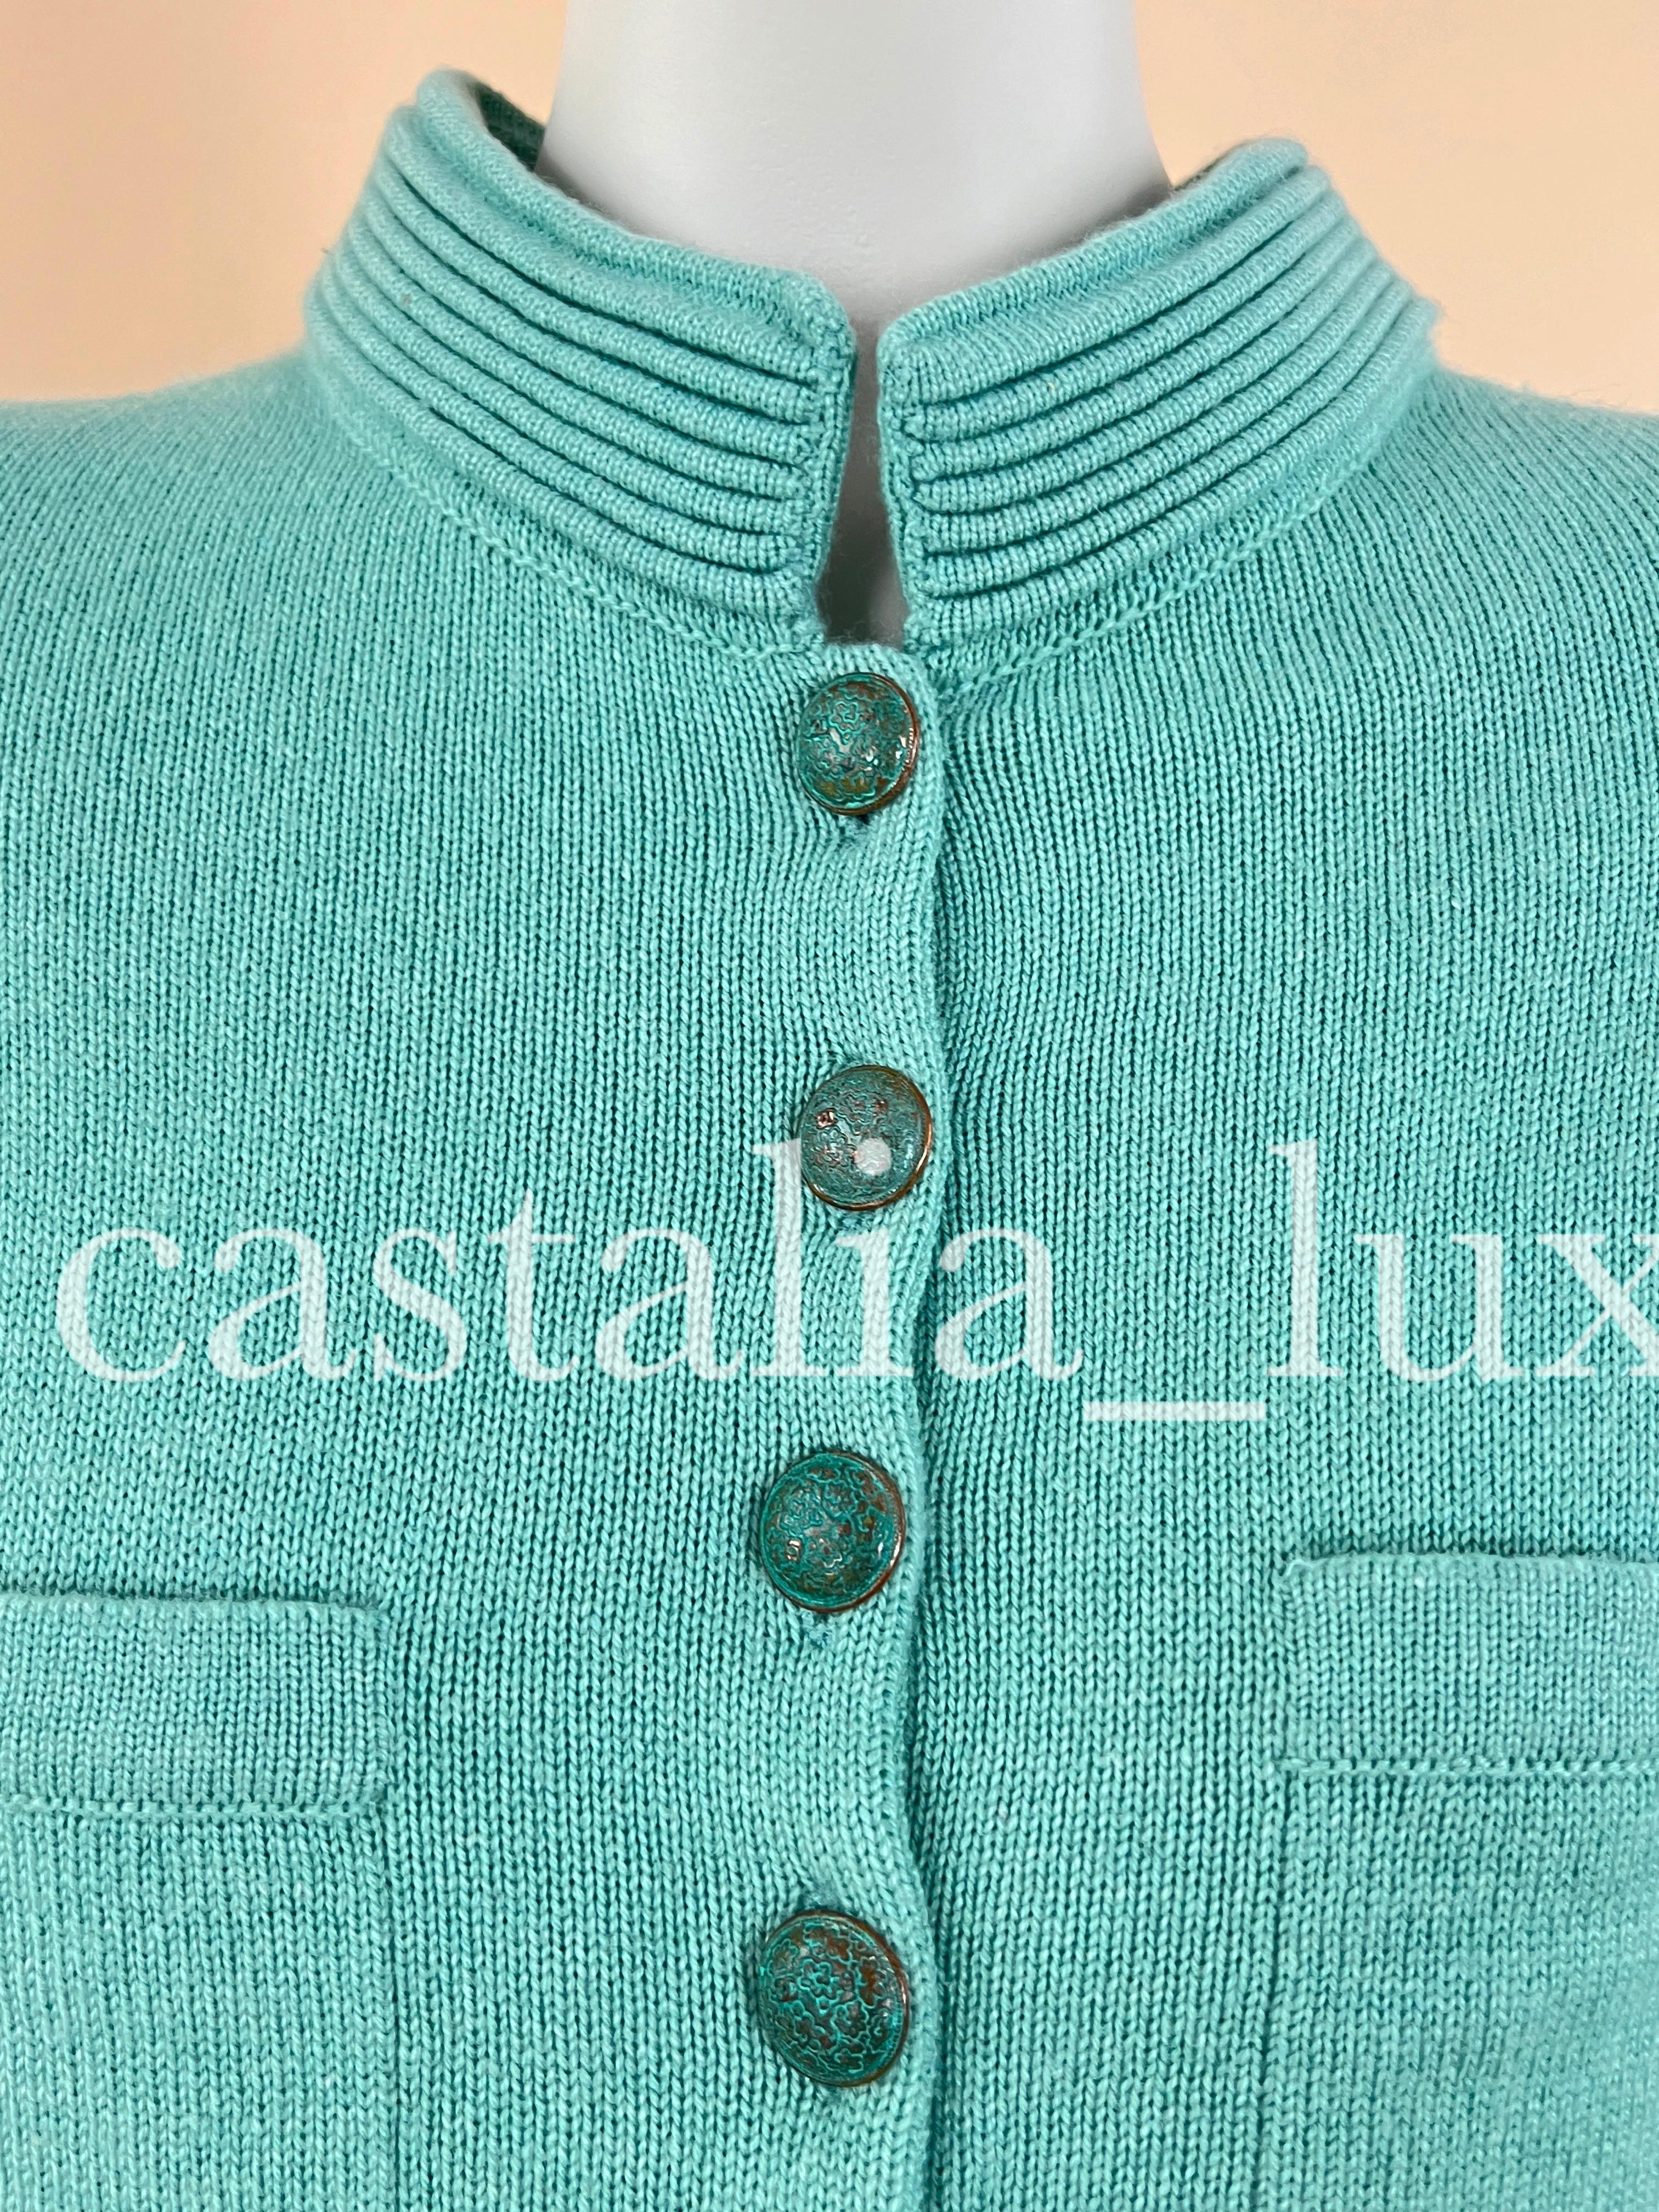 Chanel New CC Buttons Turquoise Cashmere Jacket For Sale 3